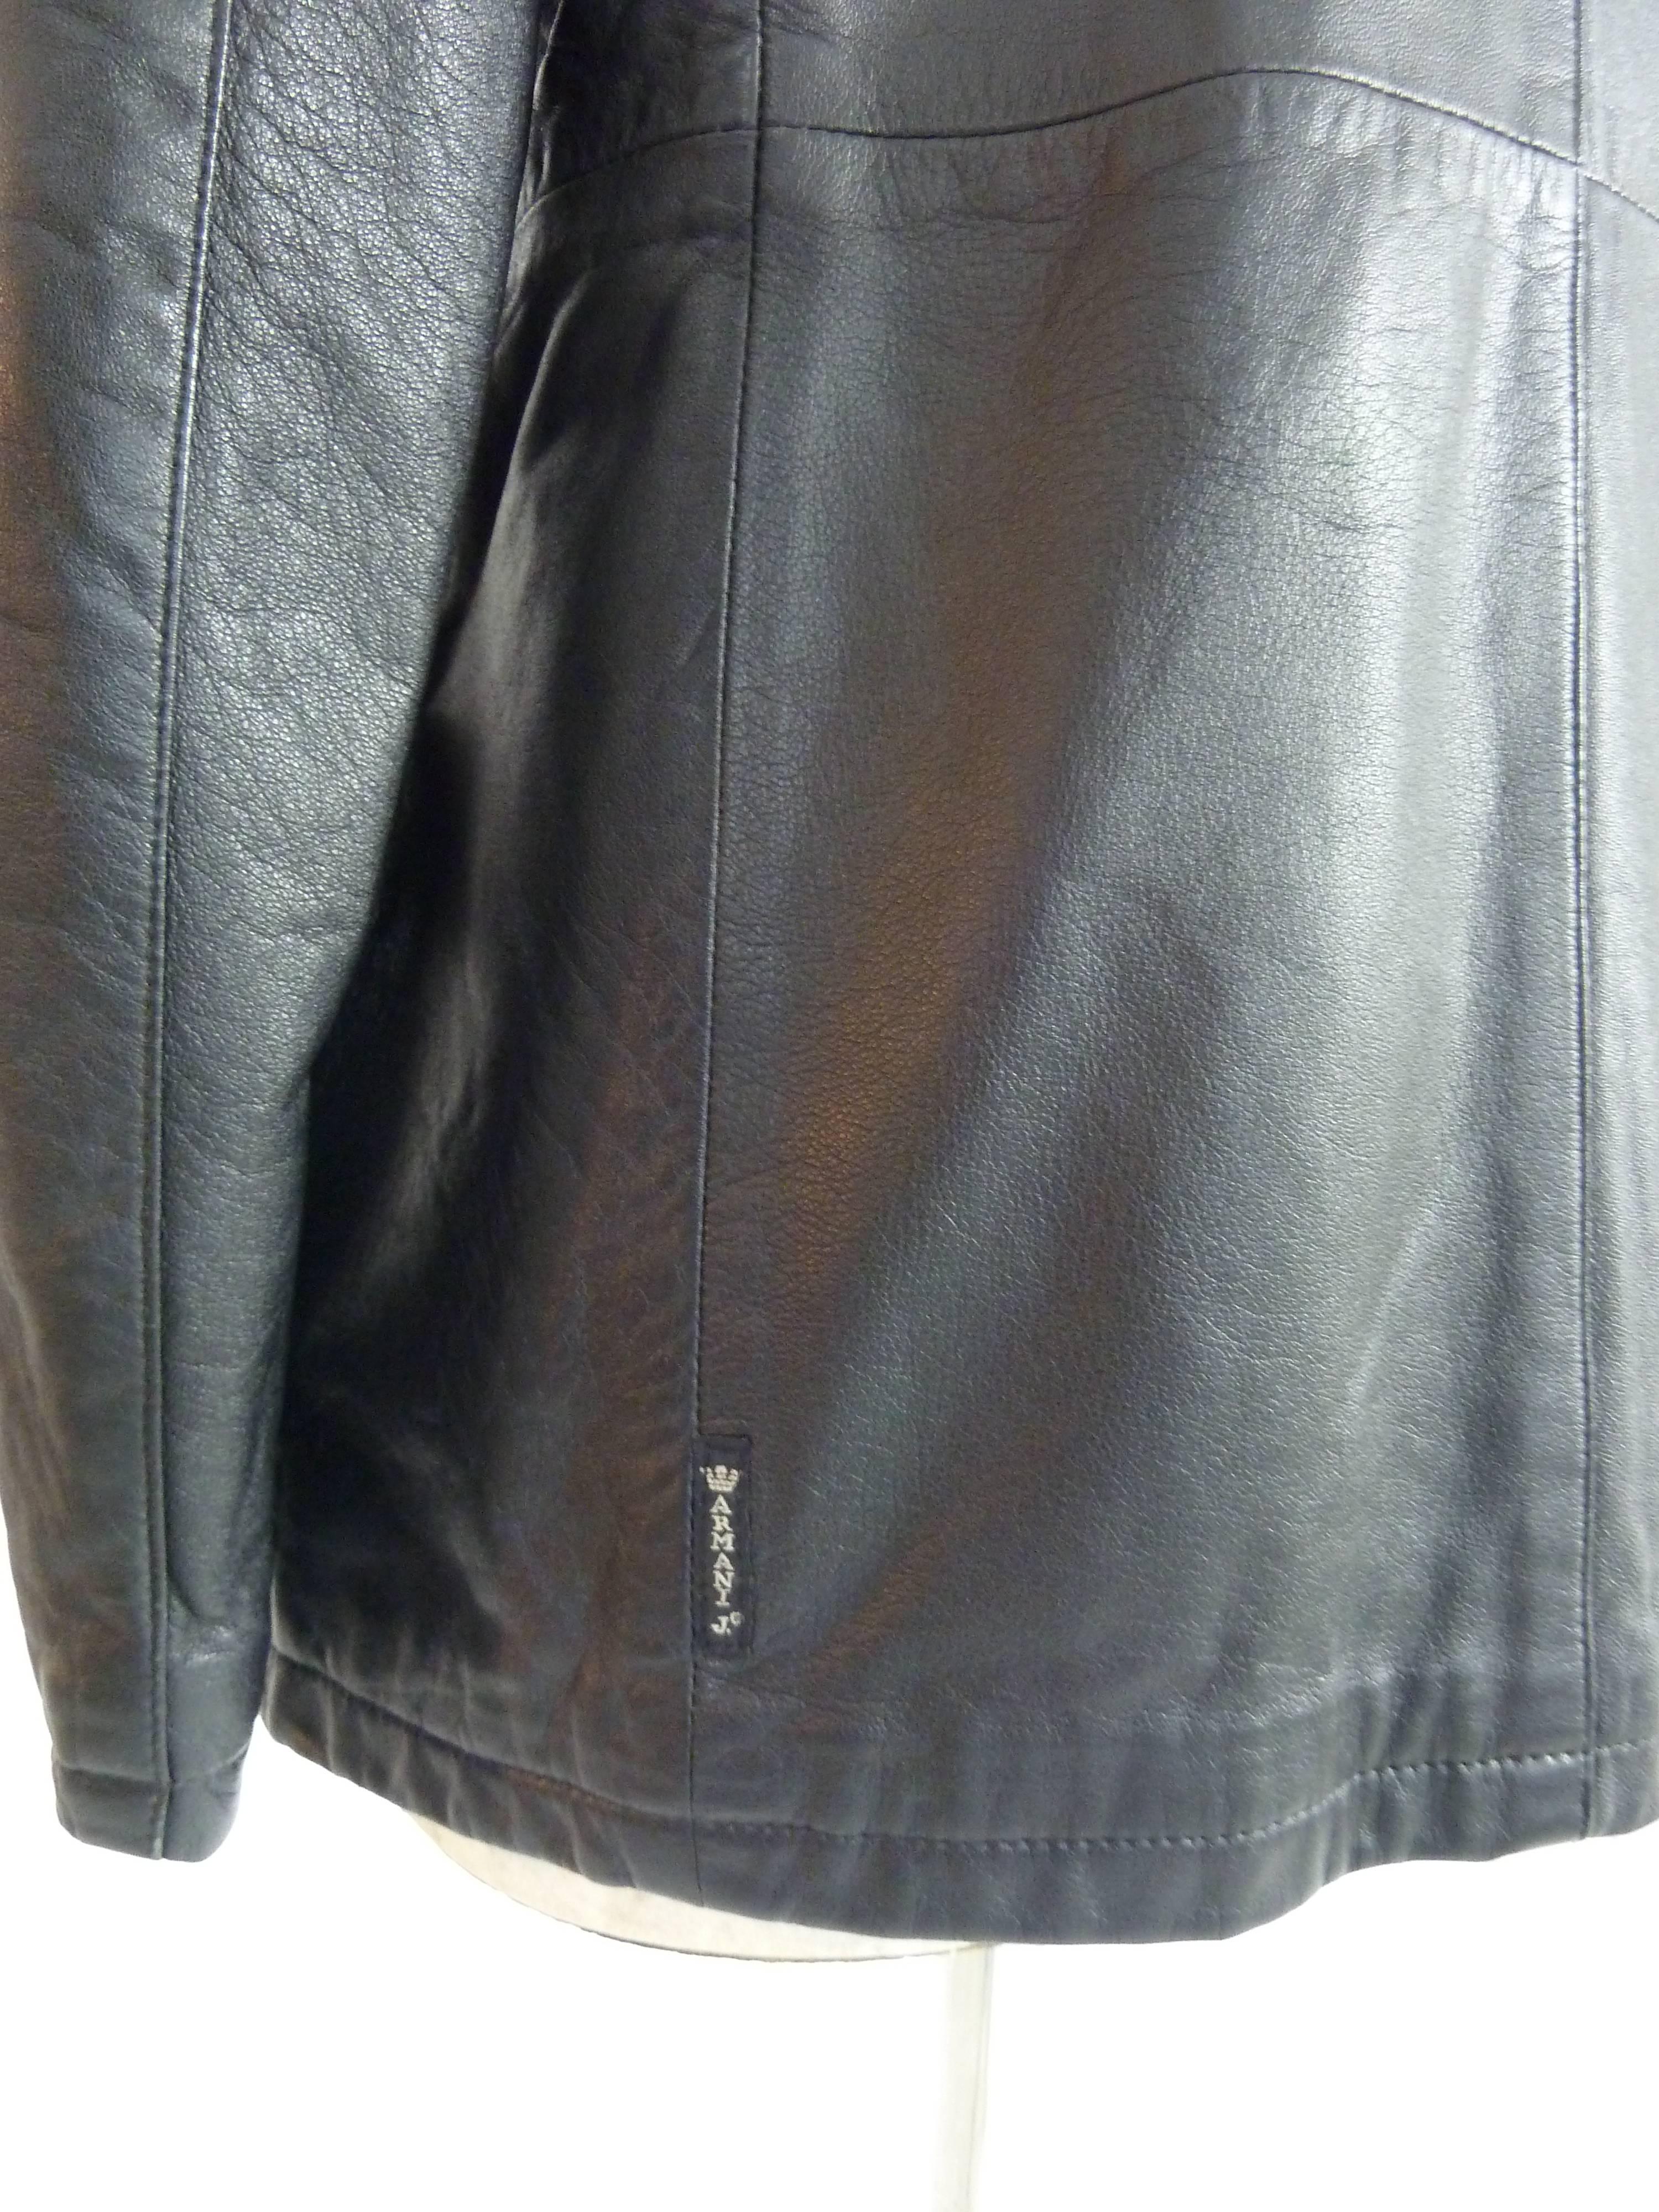 Giorgio Armani Peacoat Leather Black Double Breasted Italian Coat Jacket, 1980 In Excellent Condition For Sale In Brindisi, IT